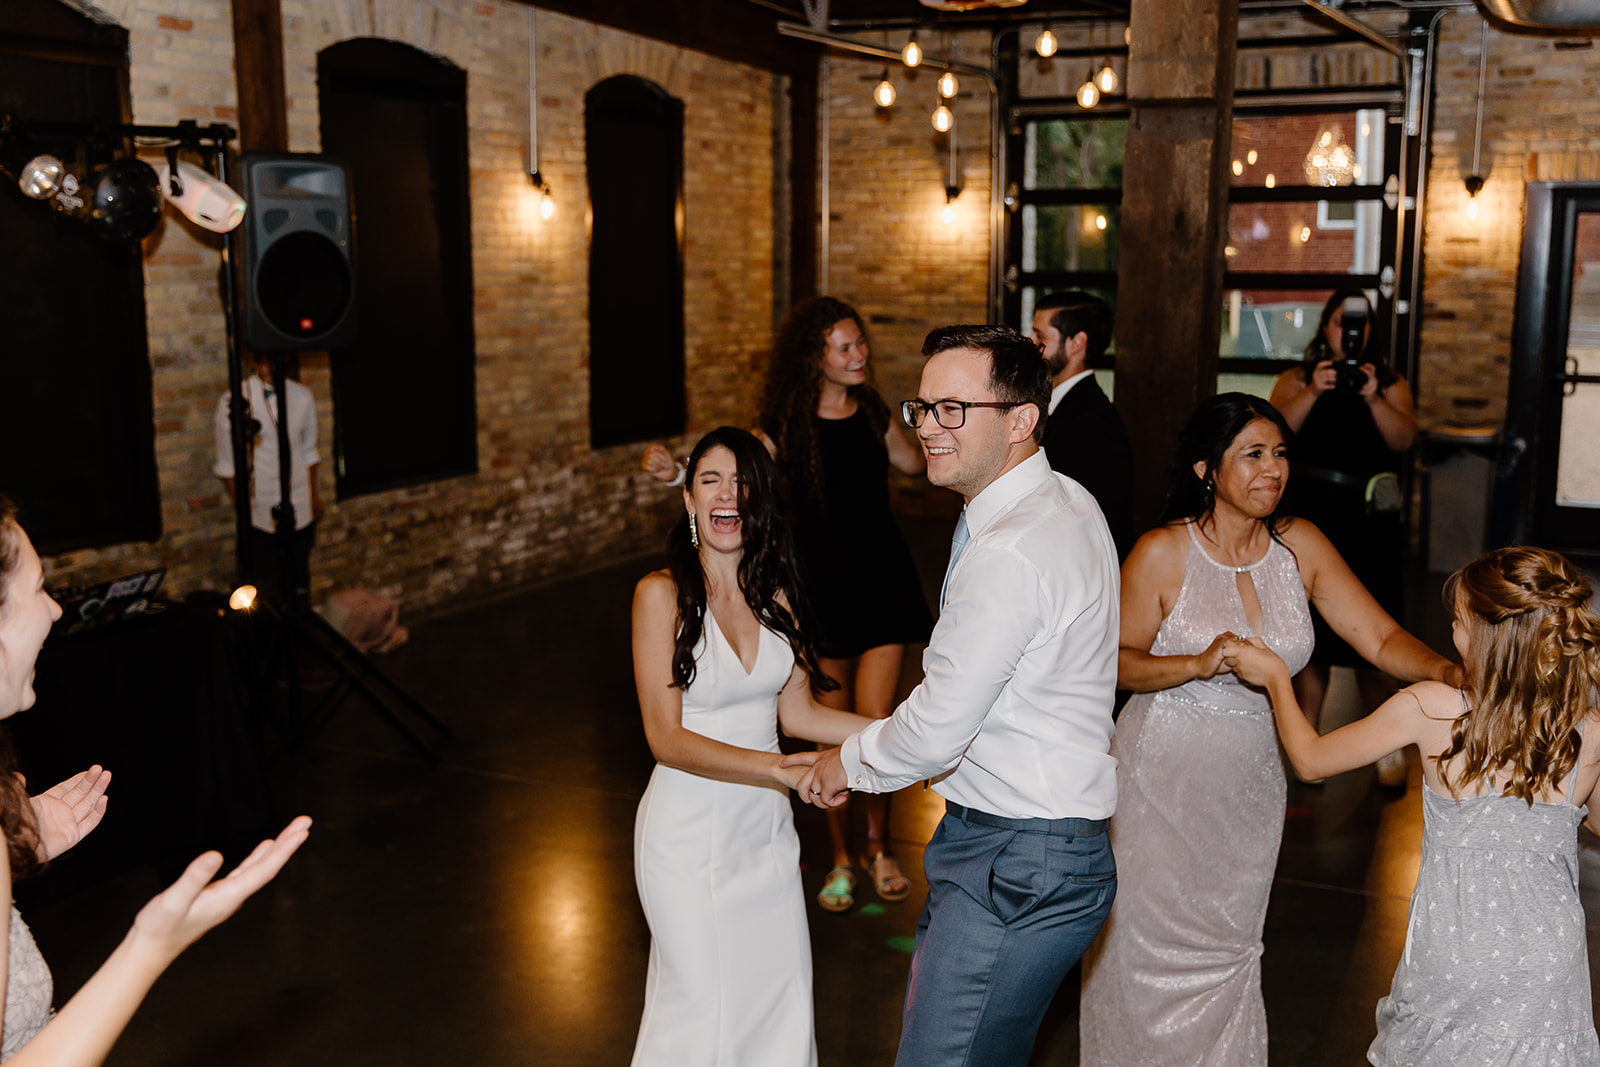 Bride and groom dance with guests on the dance floor